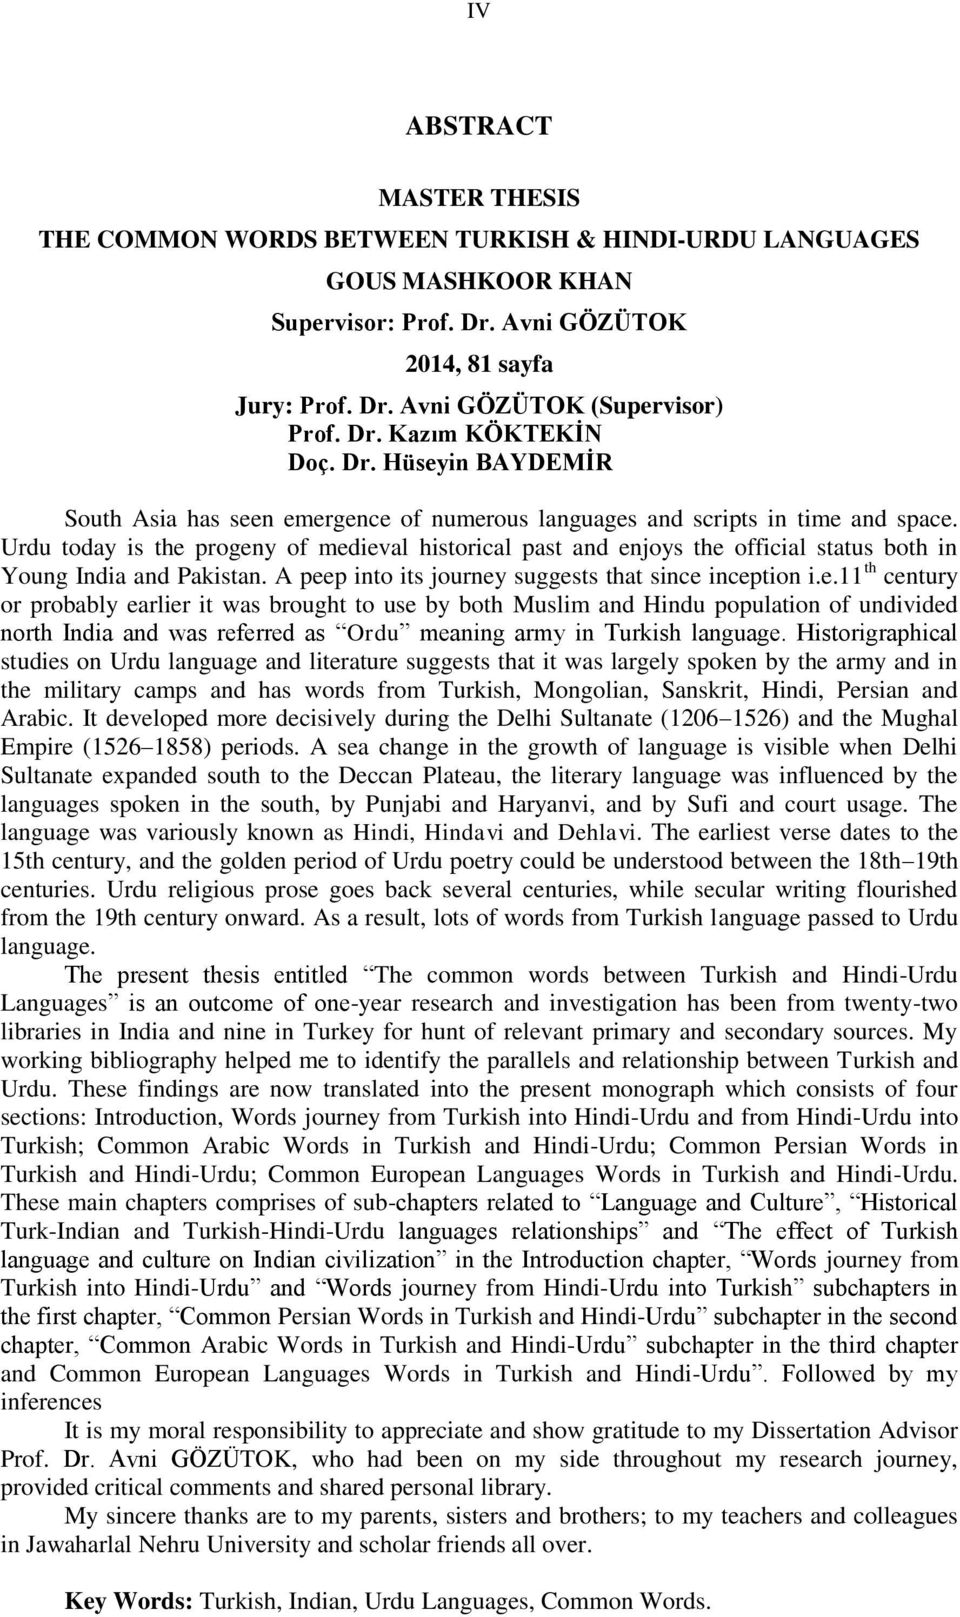 Urdu today is the progeny of medieval historical past and enjoys the official status both in Young India and Pakistan. A peep into its journey suggests that since inception i.e.11 th century or probably earlier it was brought to use by both Muslim and Hindu population of undivided north India and was referred as Ordu meaning army in Turkish language.